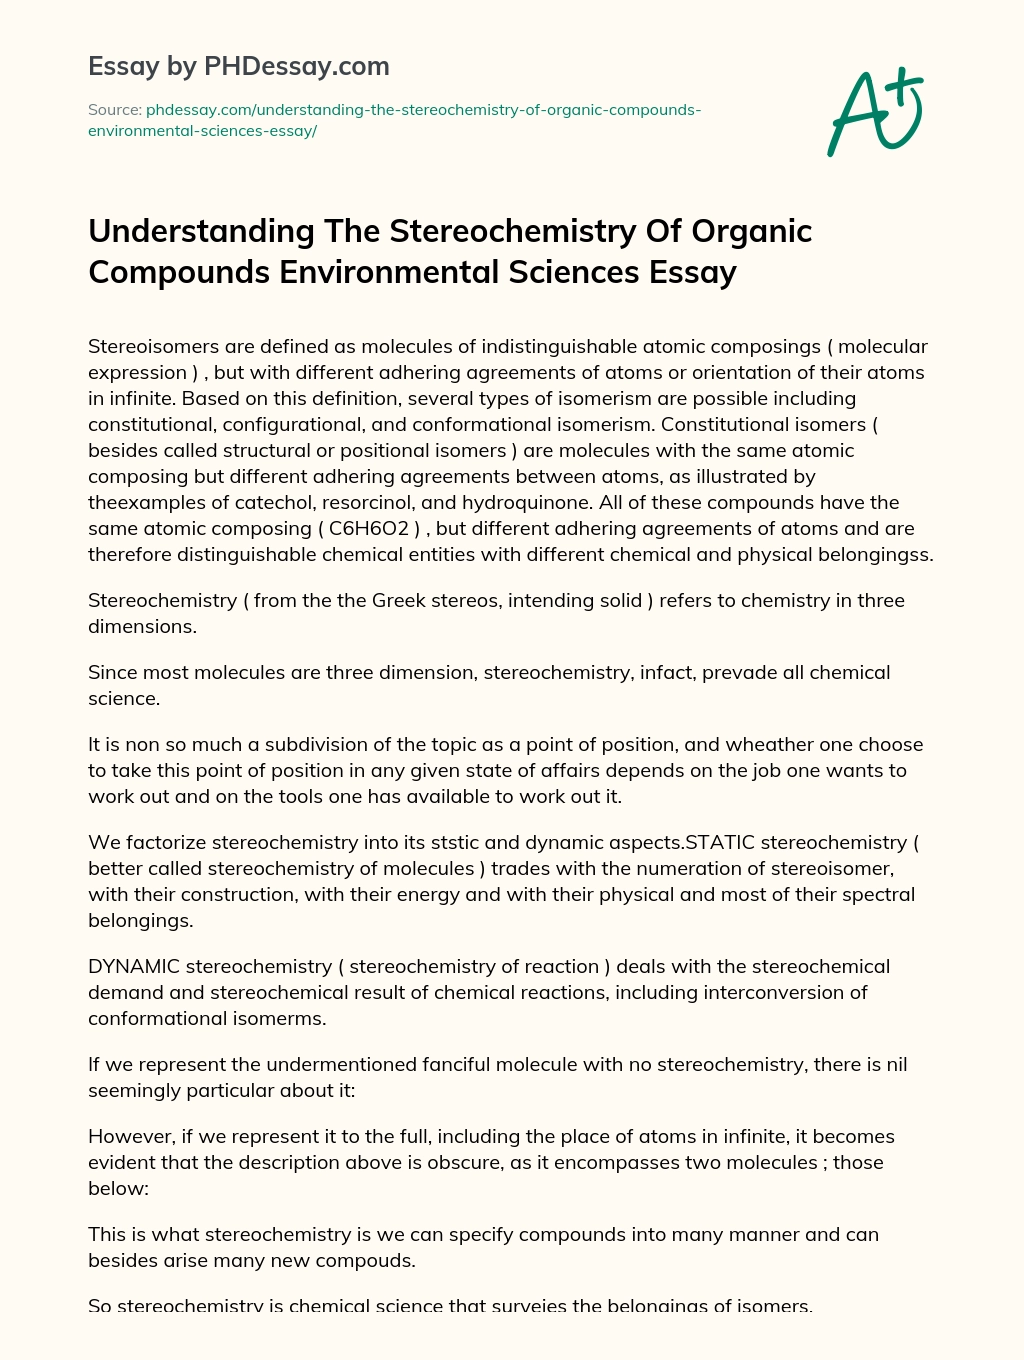 Understanding The Stereochemistry Of Organic Compounds Environmental Sciences Essay essay